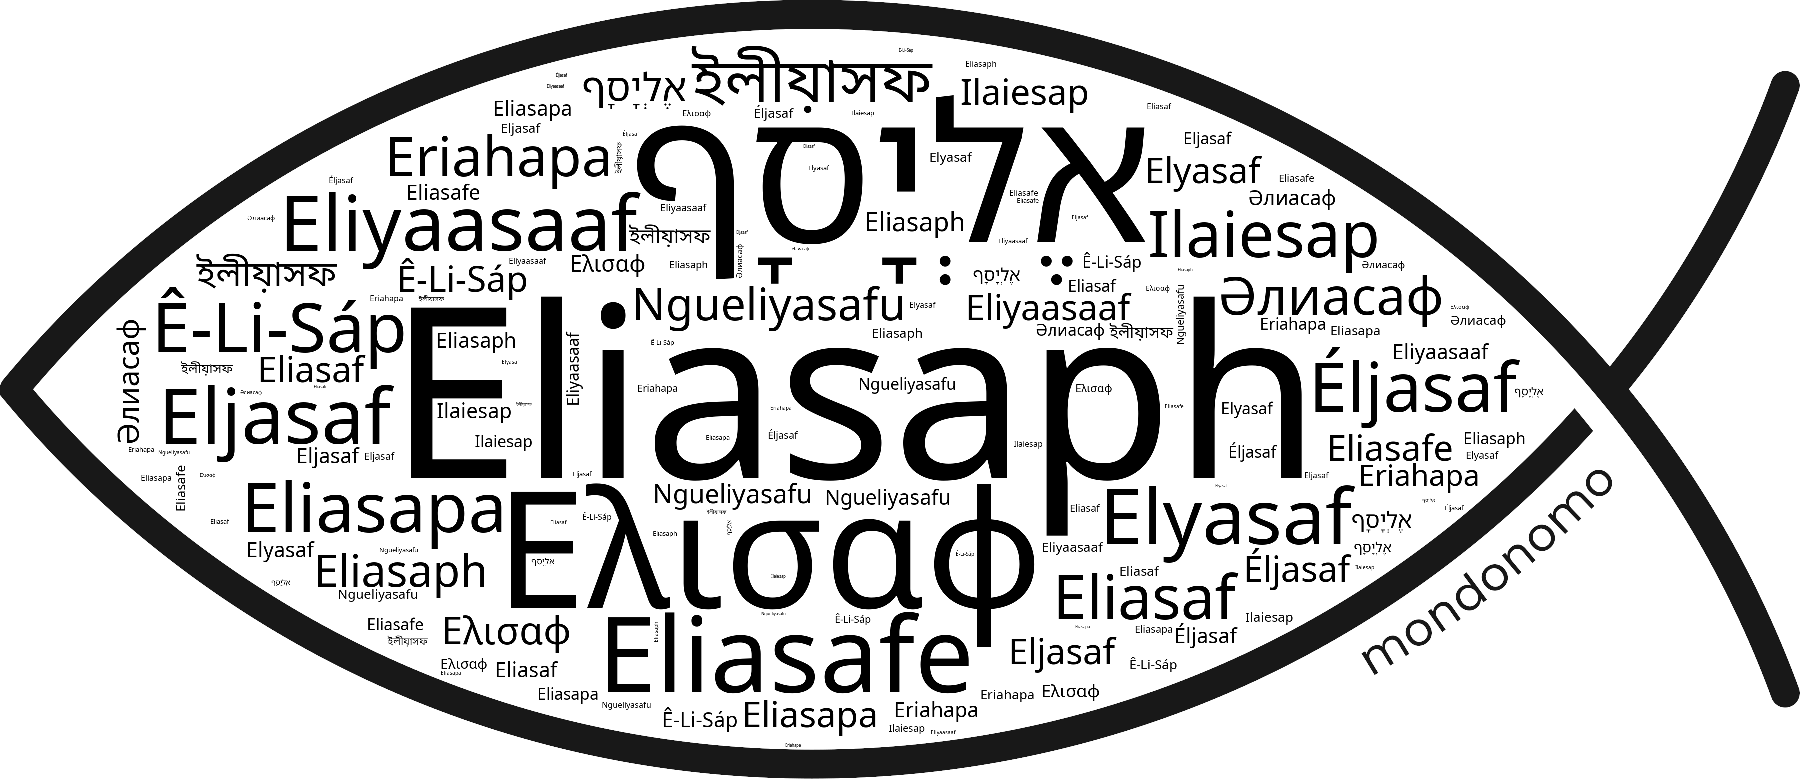 Name Eliasaph in the world's Bibles